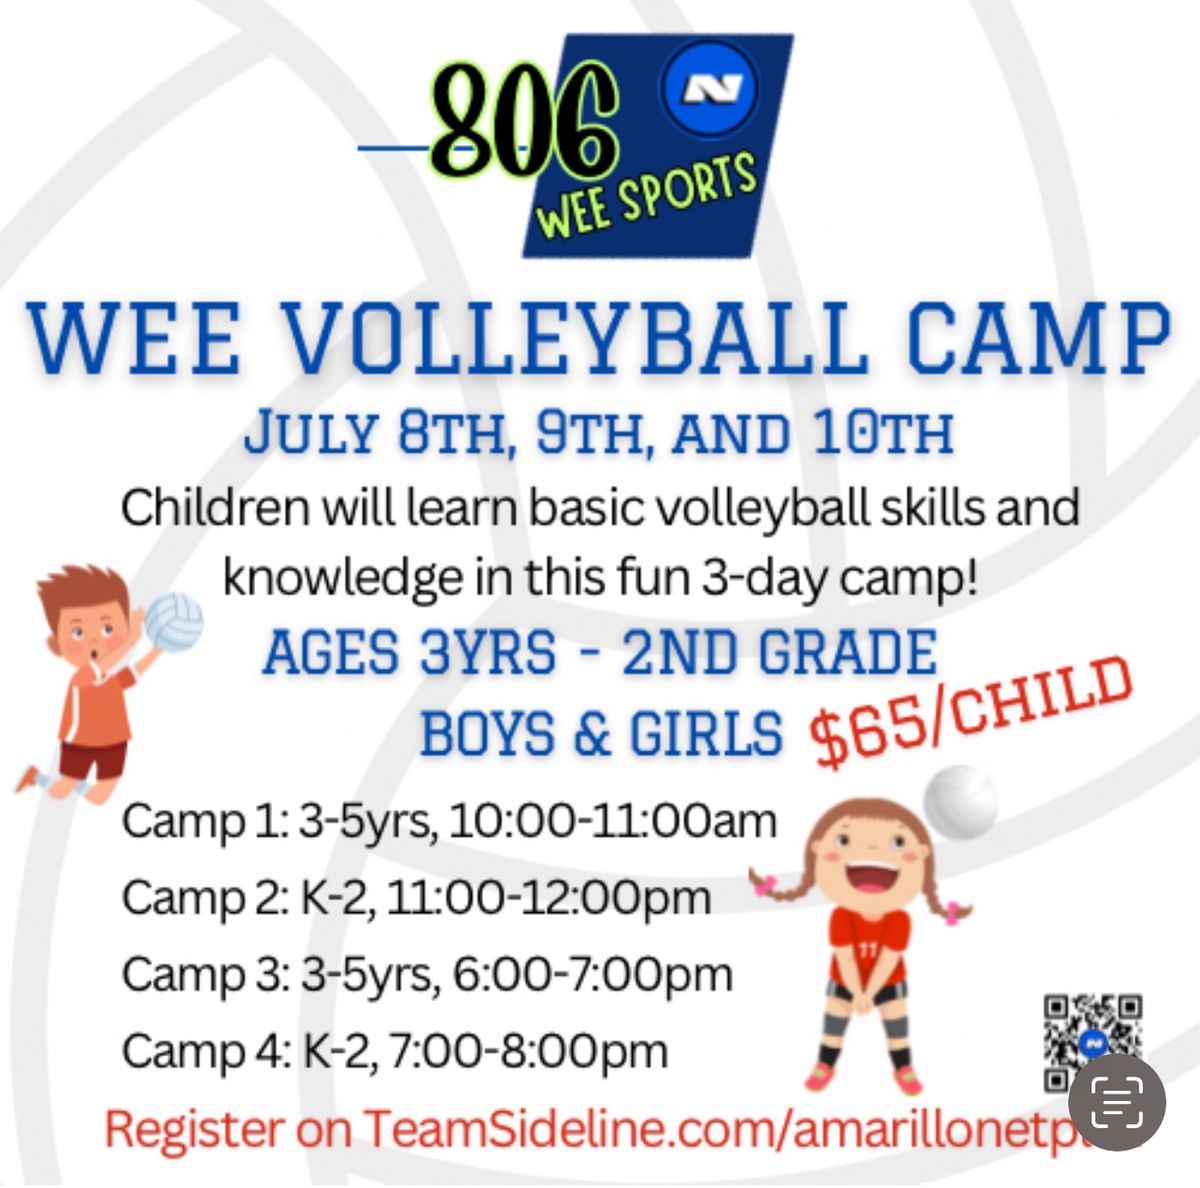 Wee Volleyball Camp 